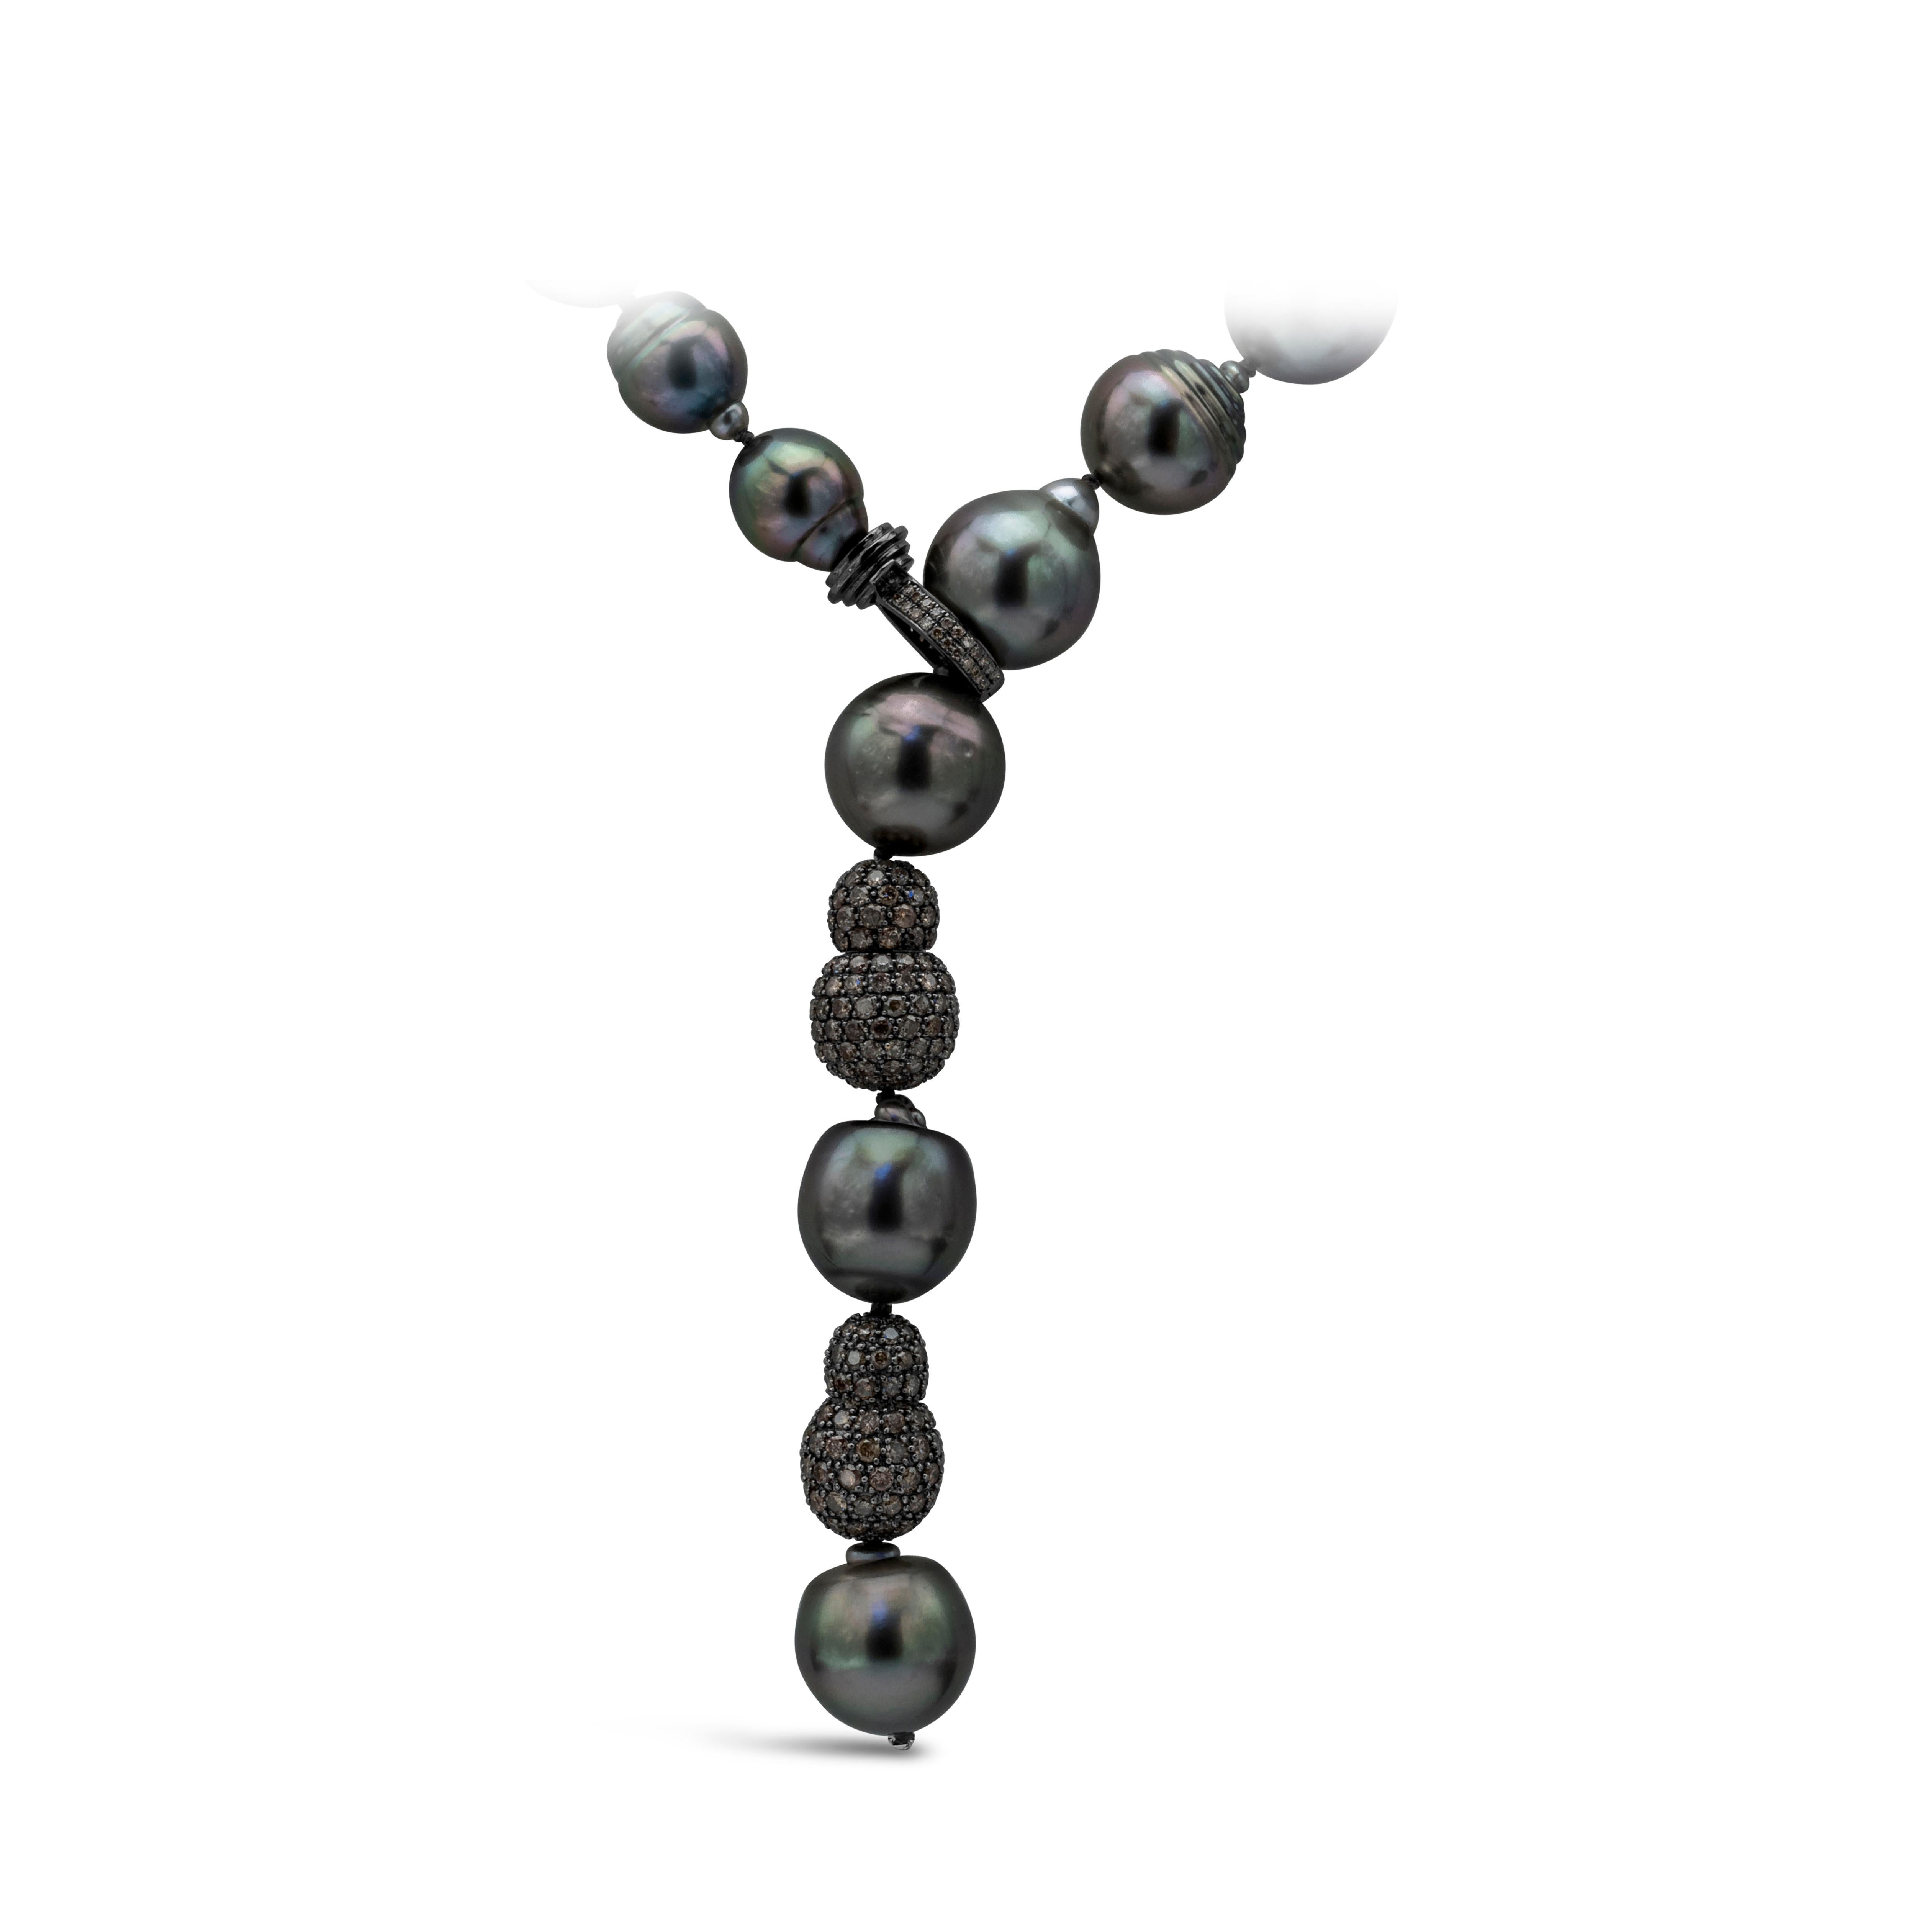 A beautiful pearl necklace showcasing 10-13.7mm baroque tahitian black pearl with diamond clasp, and features 2 diamond encrusted balls. Diamond weigh 4.00 carats total. Made in 18K Black Rhodium.

Style available with matching earrings.

Roman